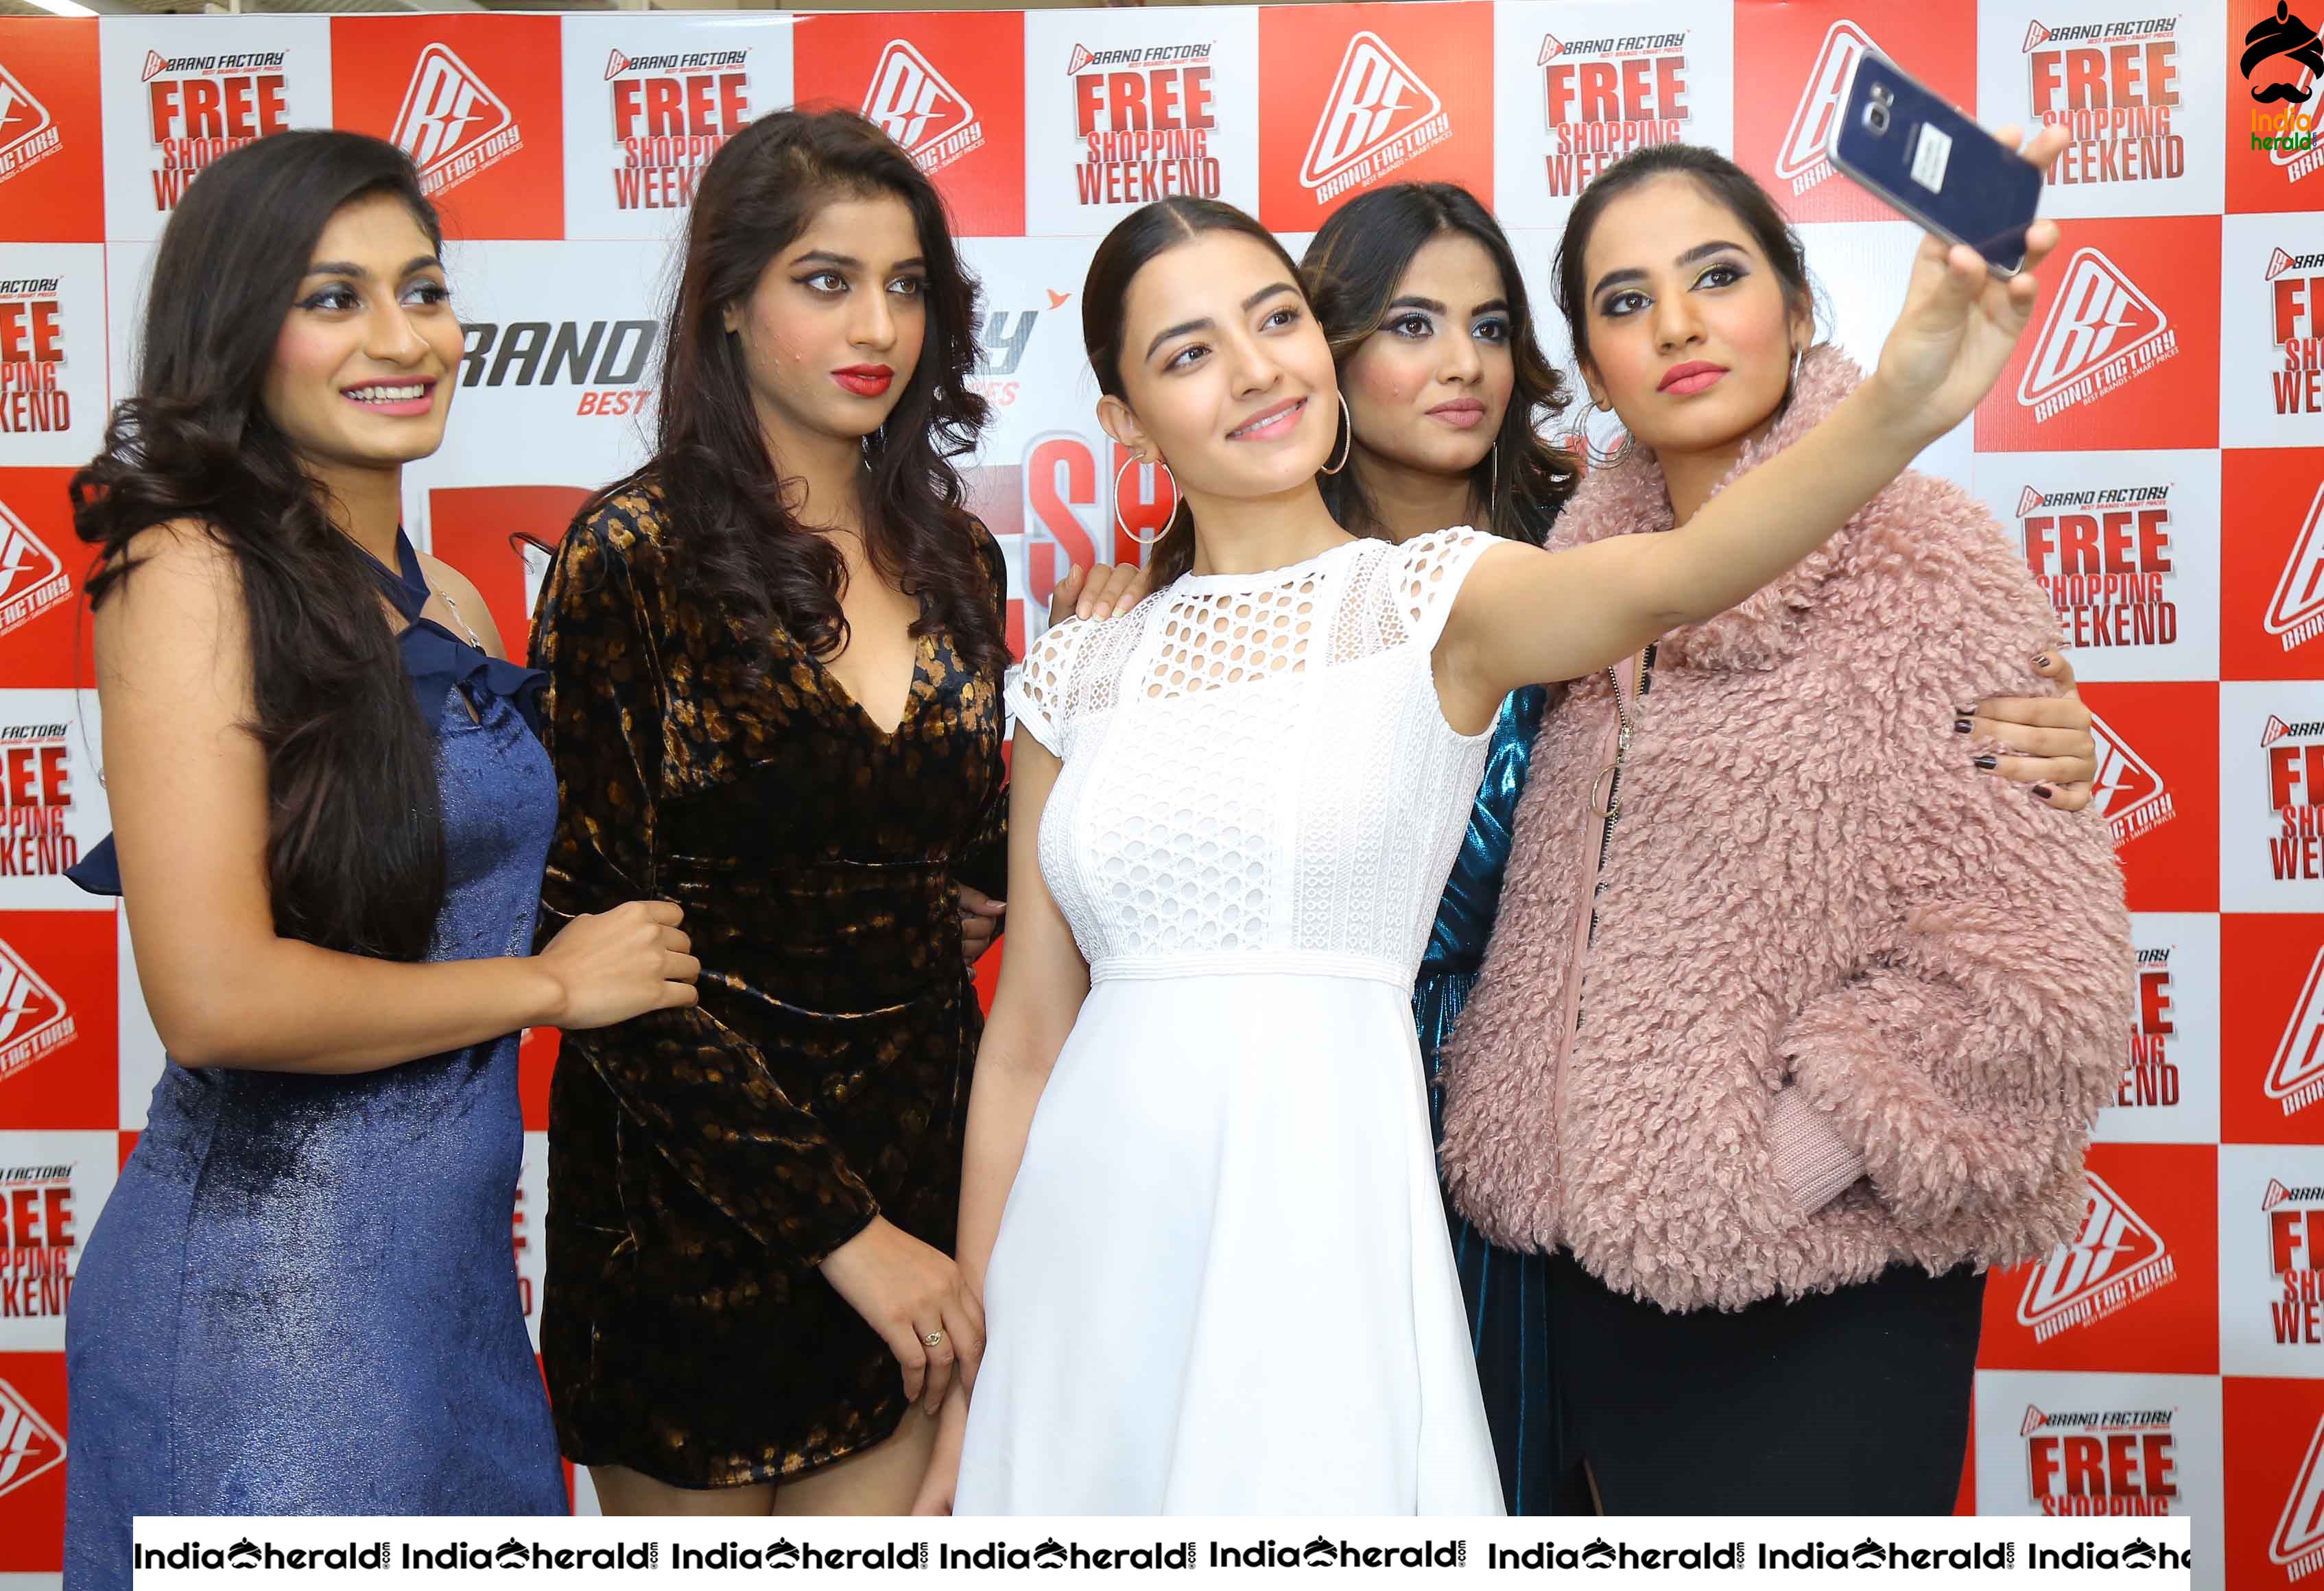 Hebah Patel and Rukshar Dillon Unveils Poster at Pre Launch Celebrations of Free Shopping Weekend by BRAND FACTORY Set 3